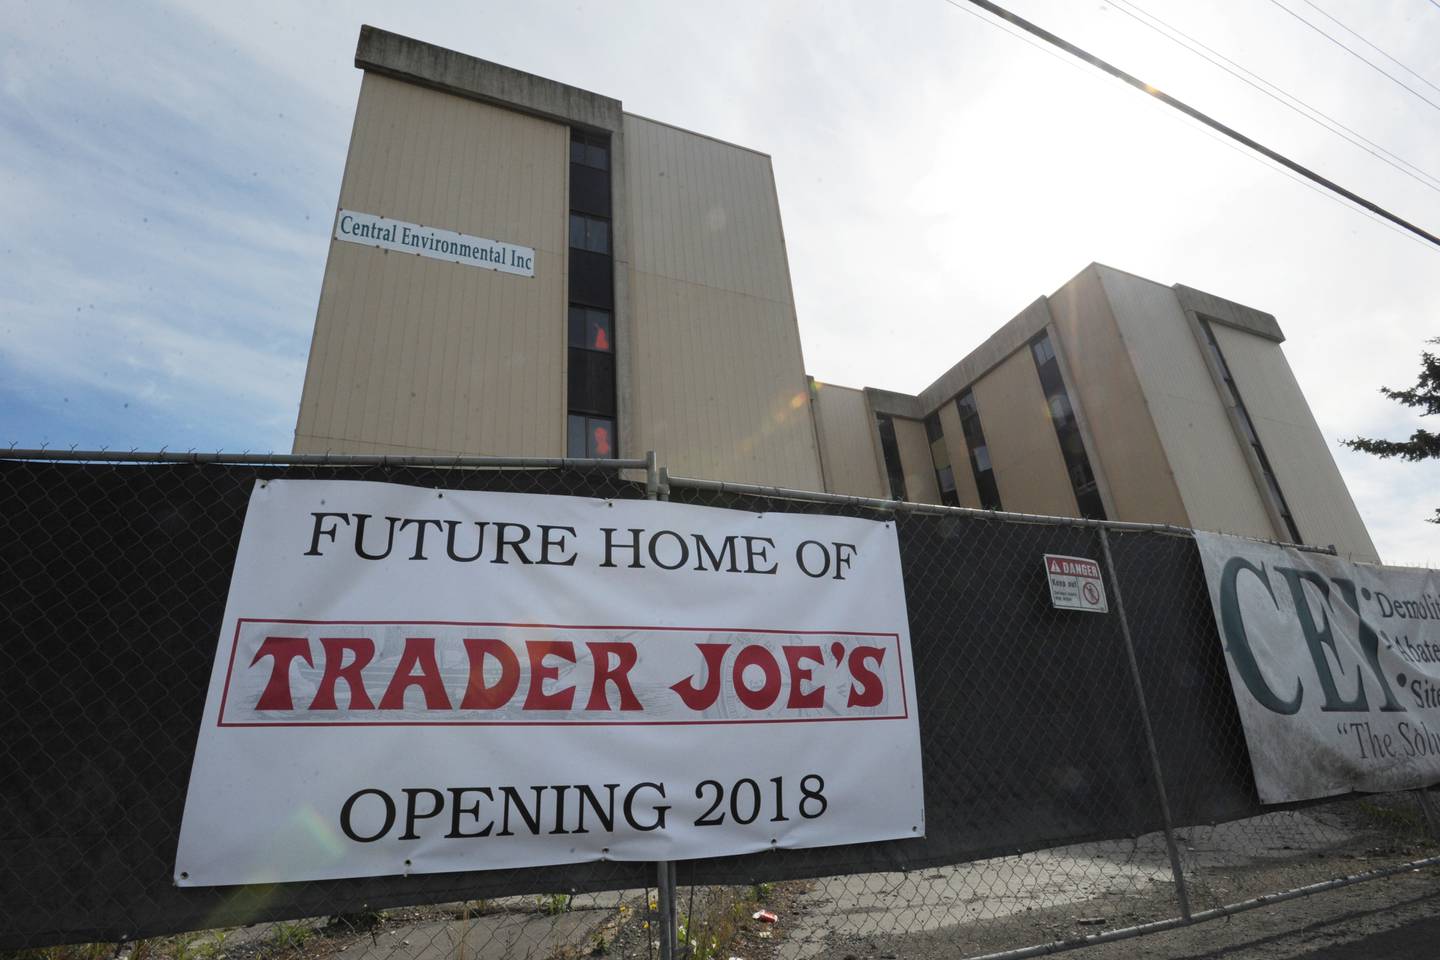 Future Home of Trader Joe’s Openings 2018 Northern Lights Hotel